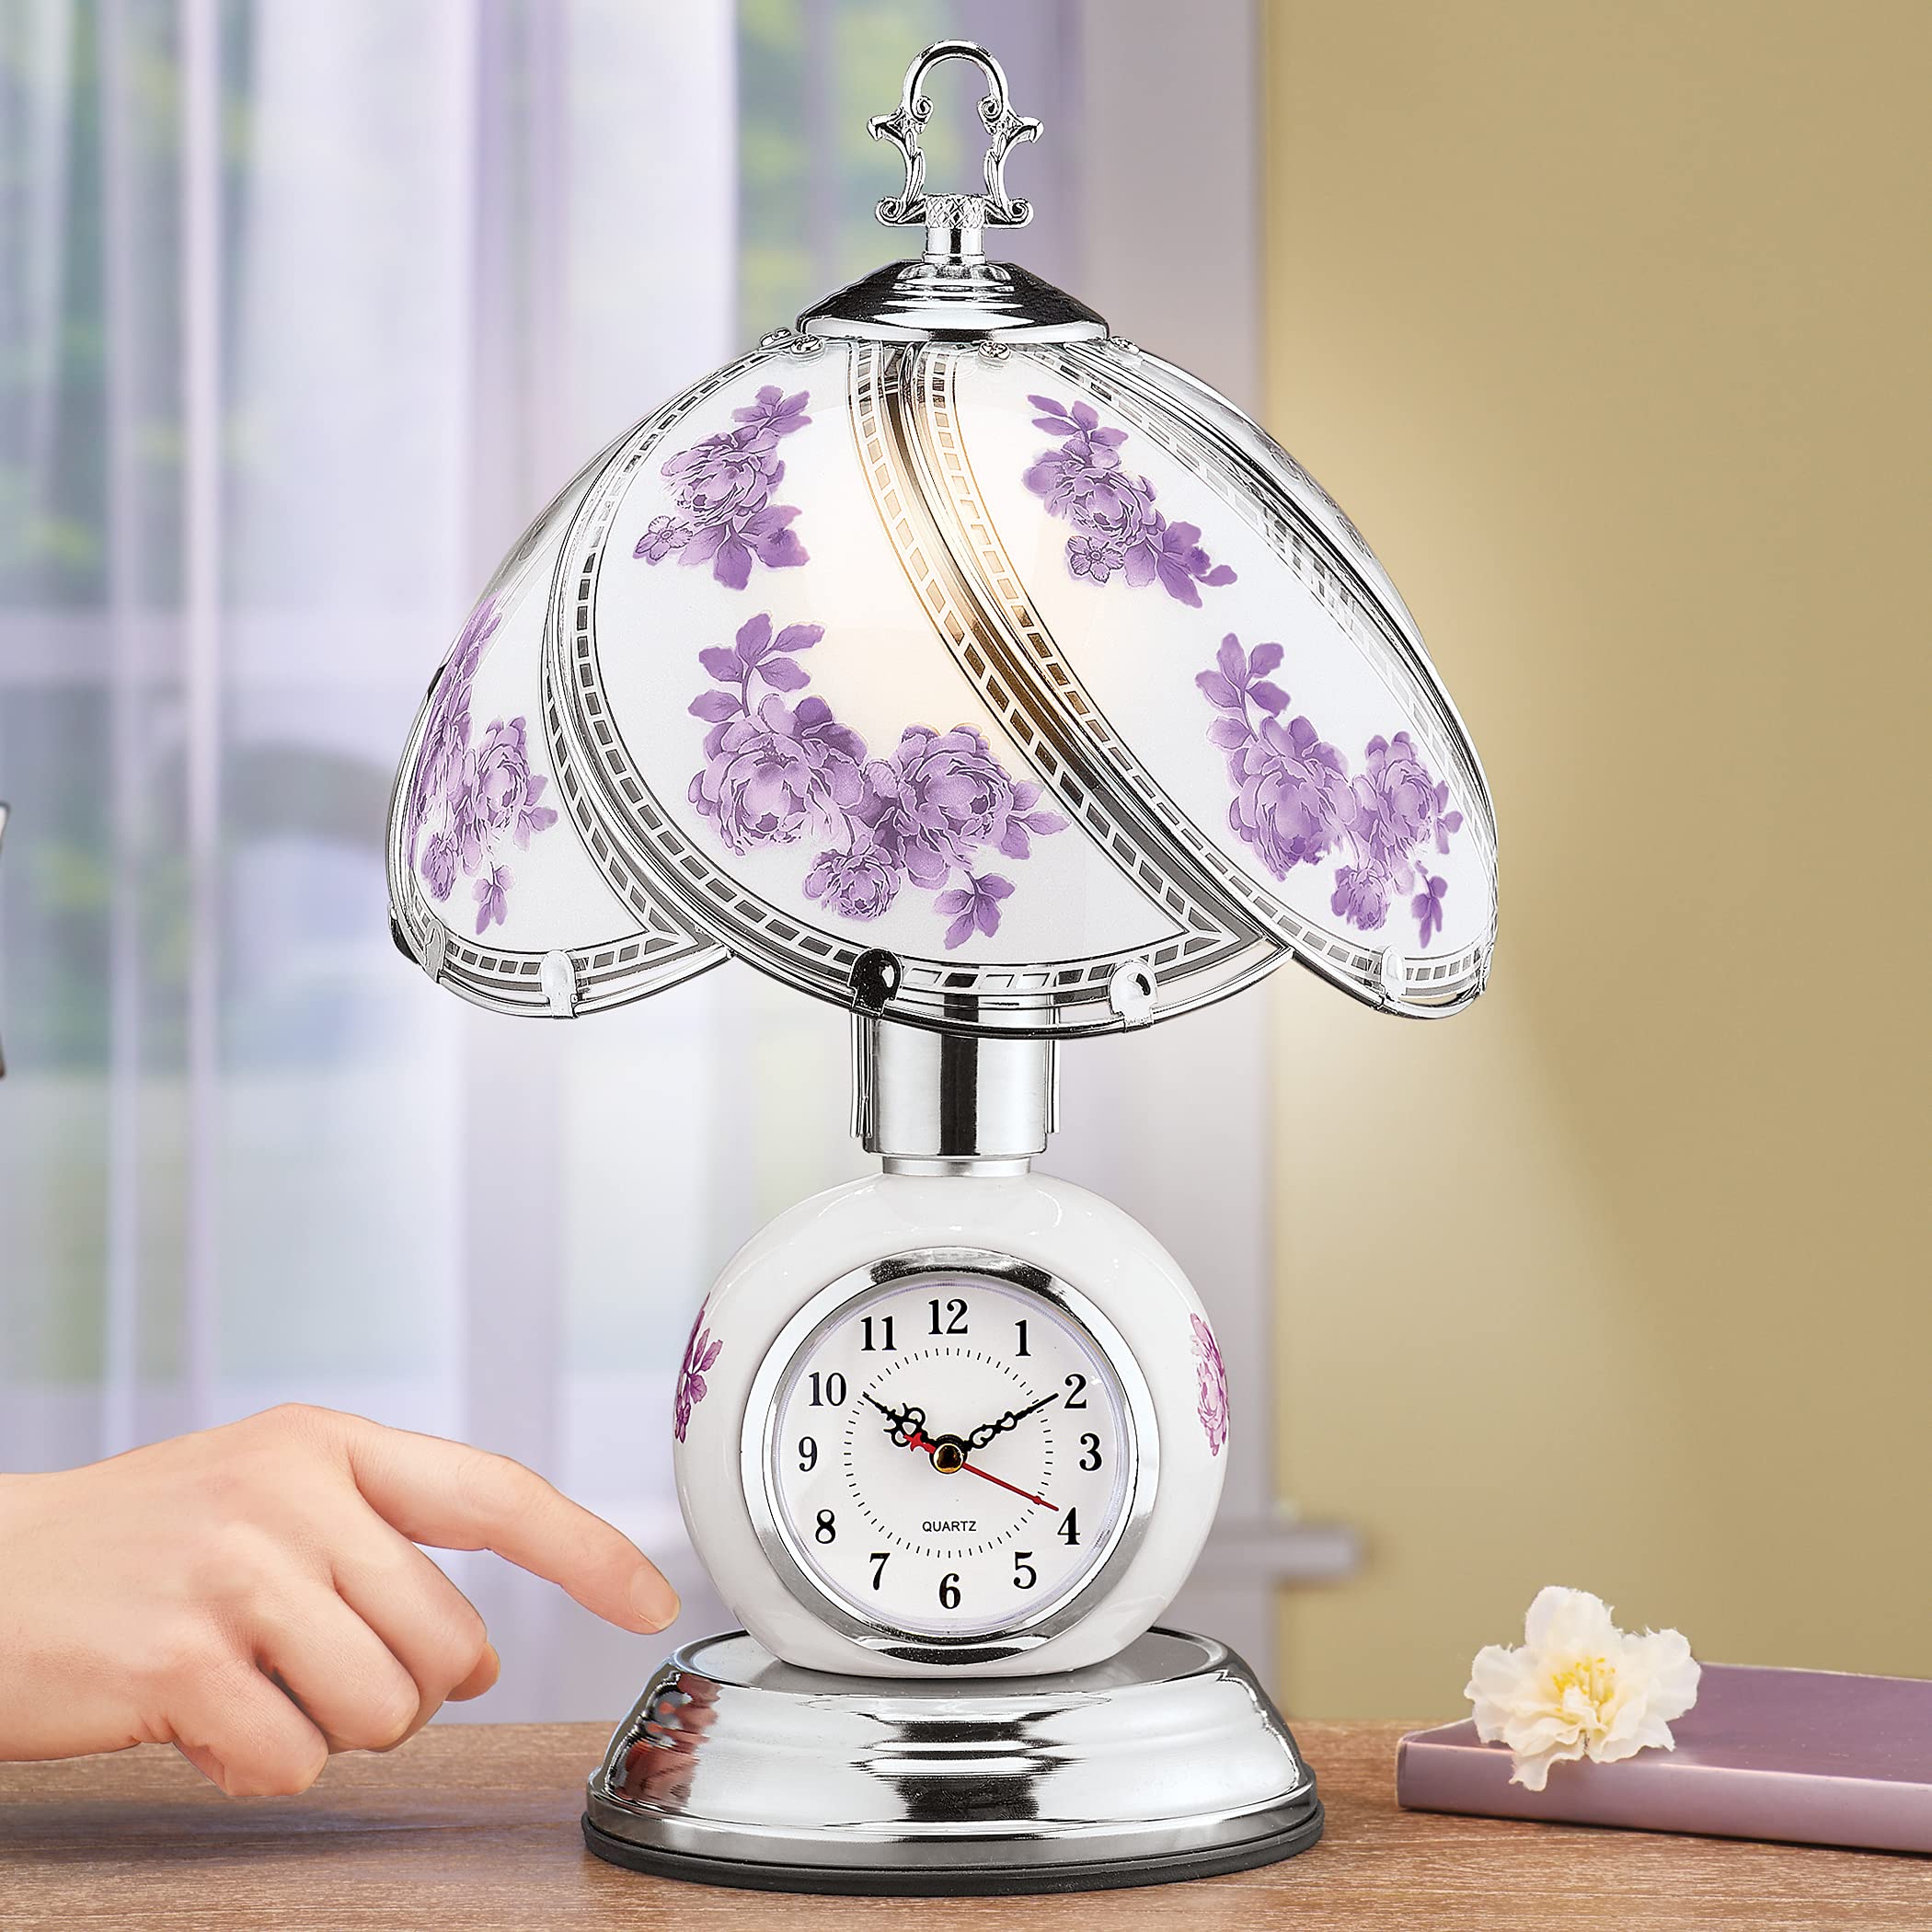 Collections Etc Rose Glass Panel Touch Lamp with Analog Clock - Silver-Toned Base - 3 Levels of Brightness - Glass, Metal - 9